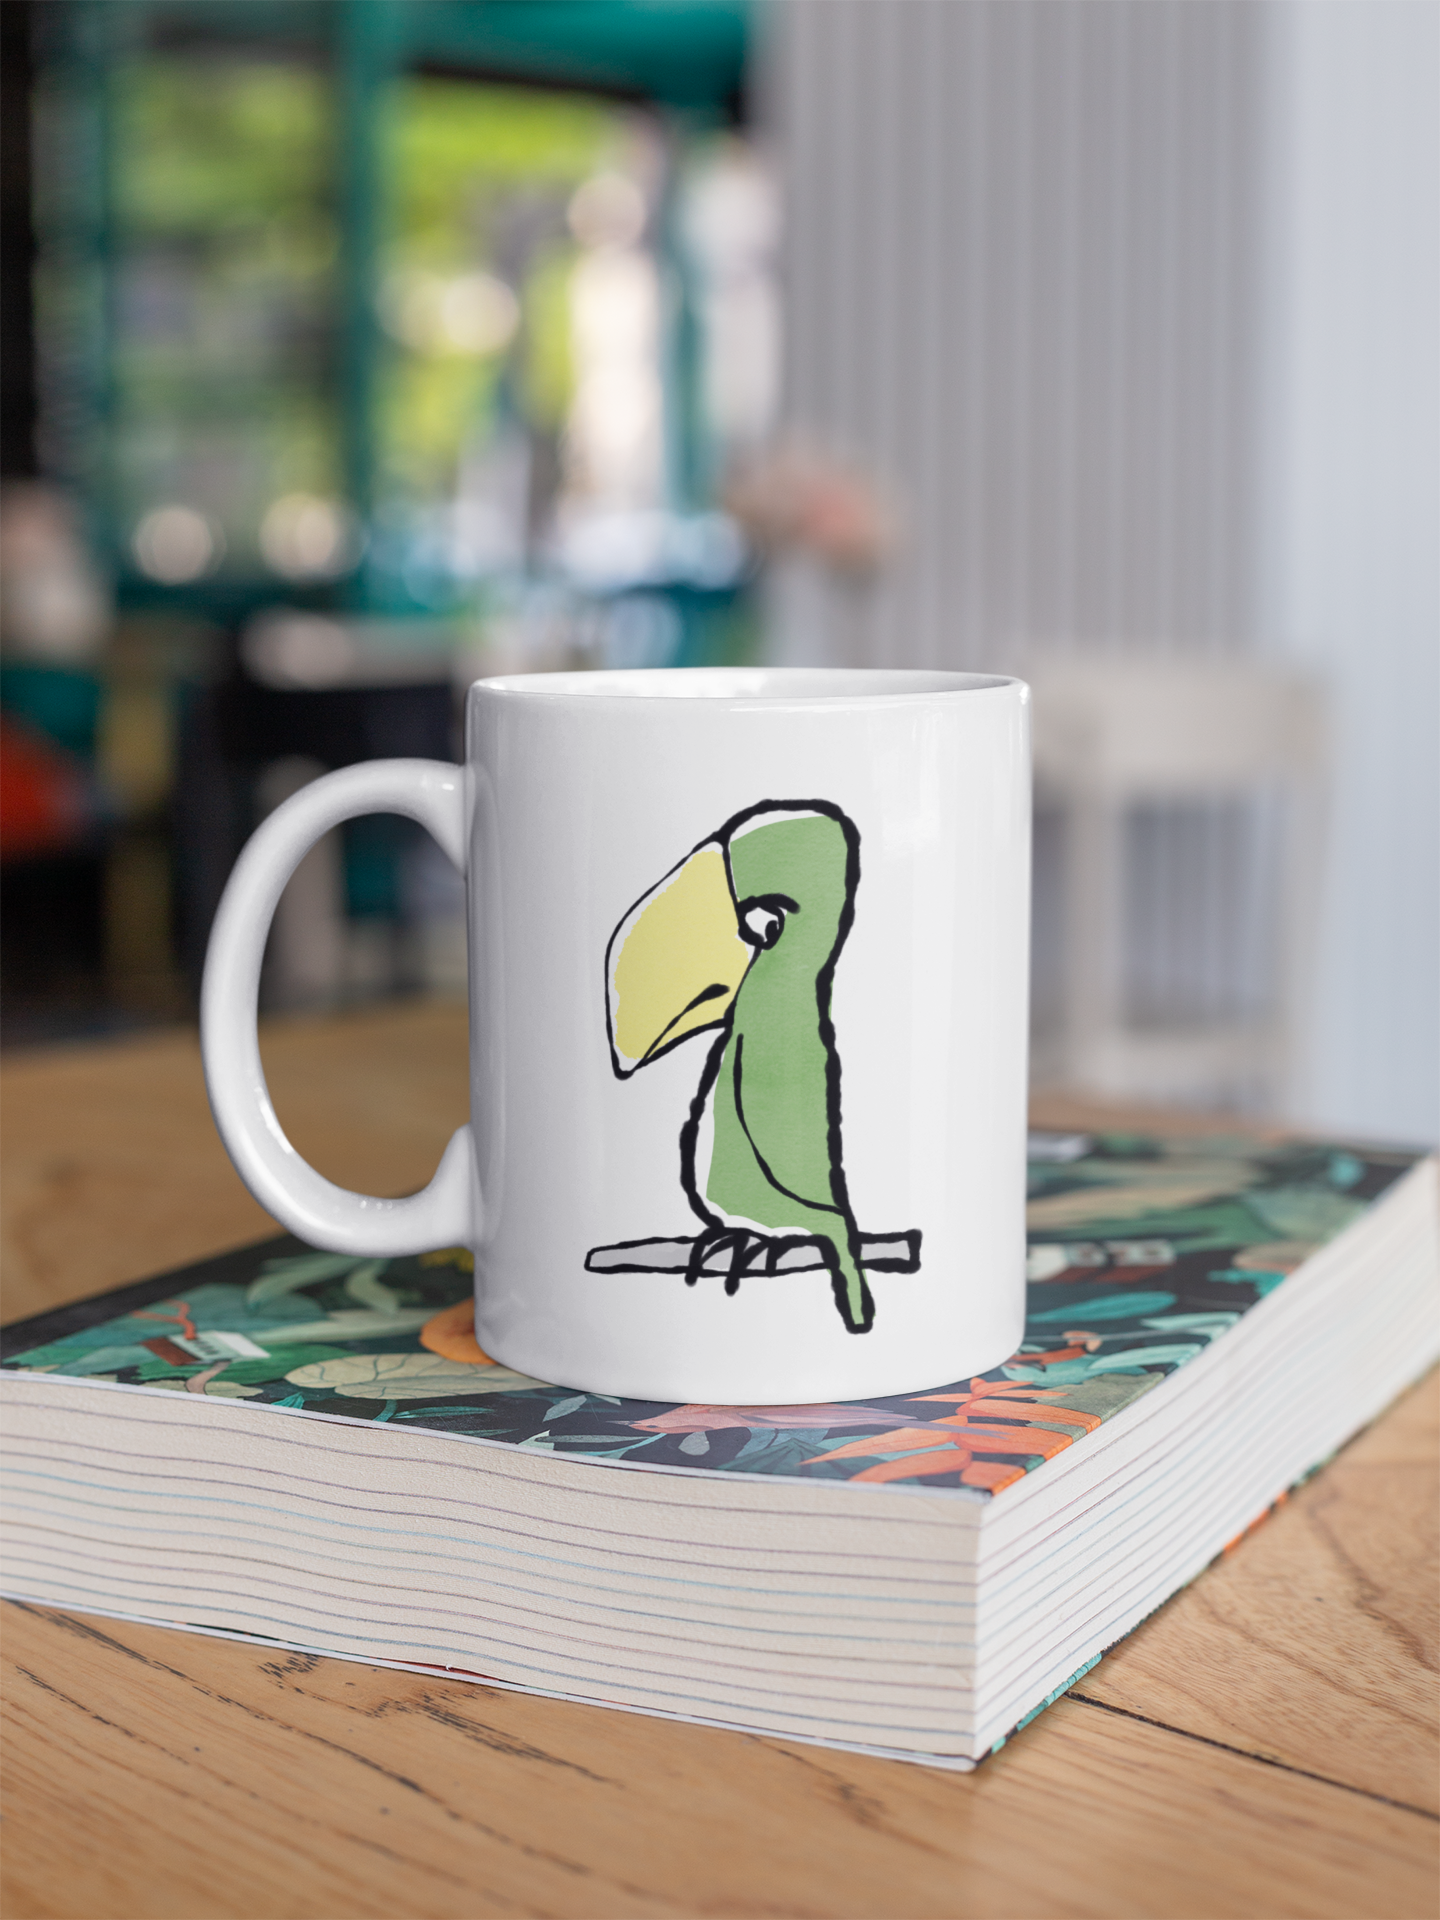 Funny Peter Parrot mug - Original Illustrated Parrot design on a coffee mug by Hector and Bone on a table